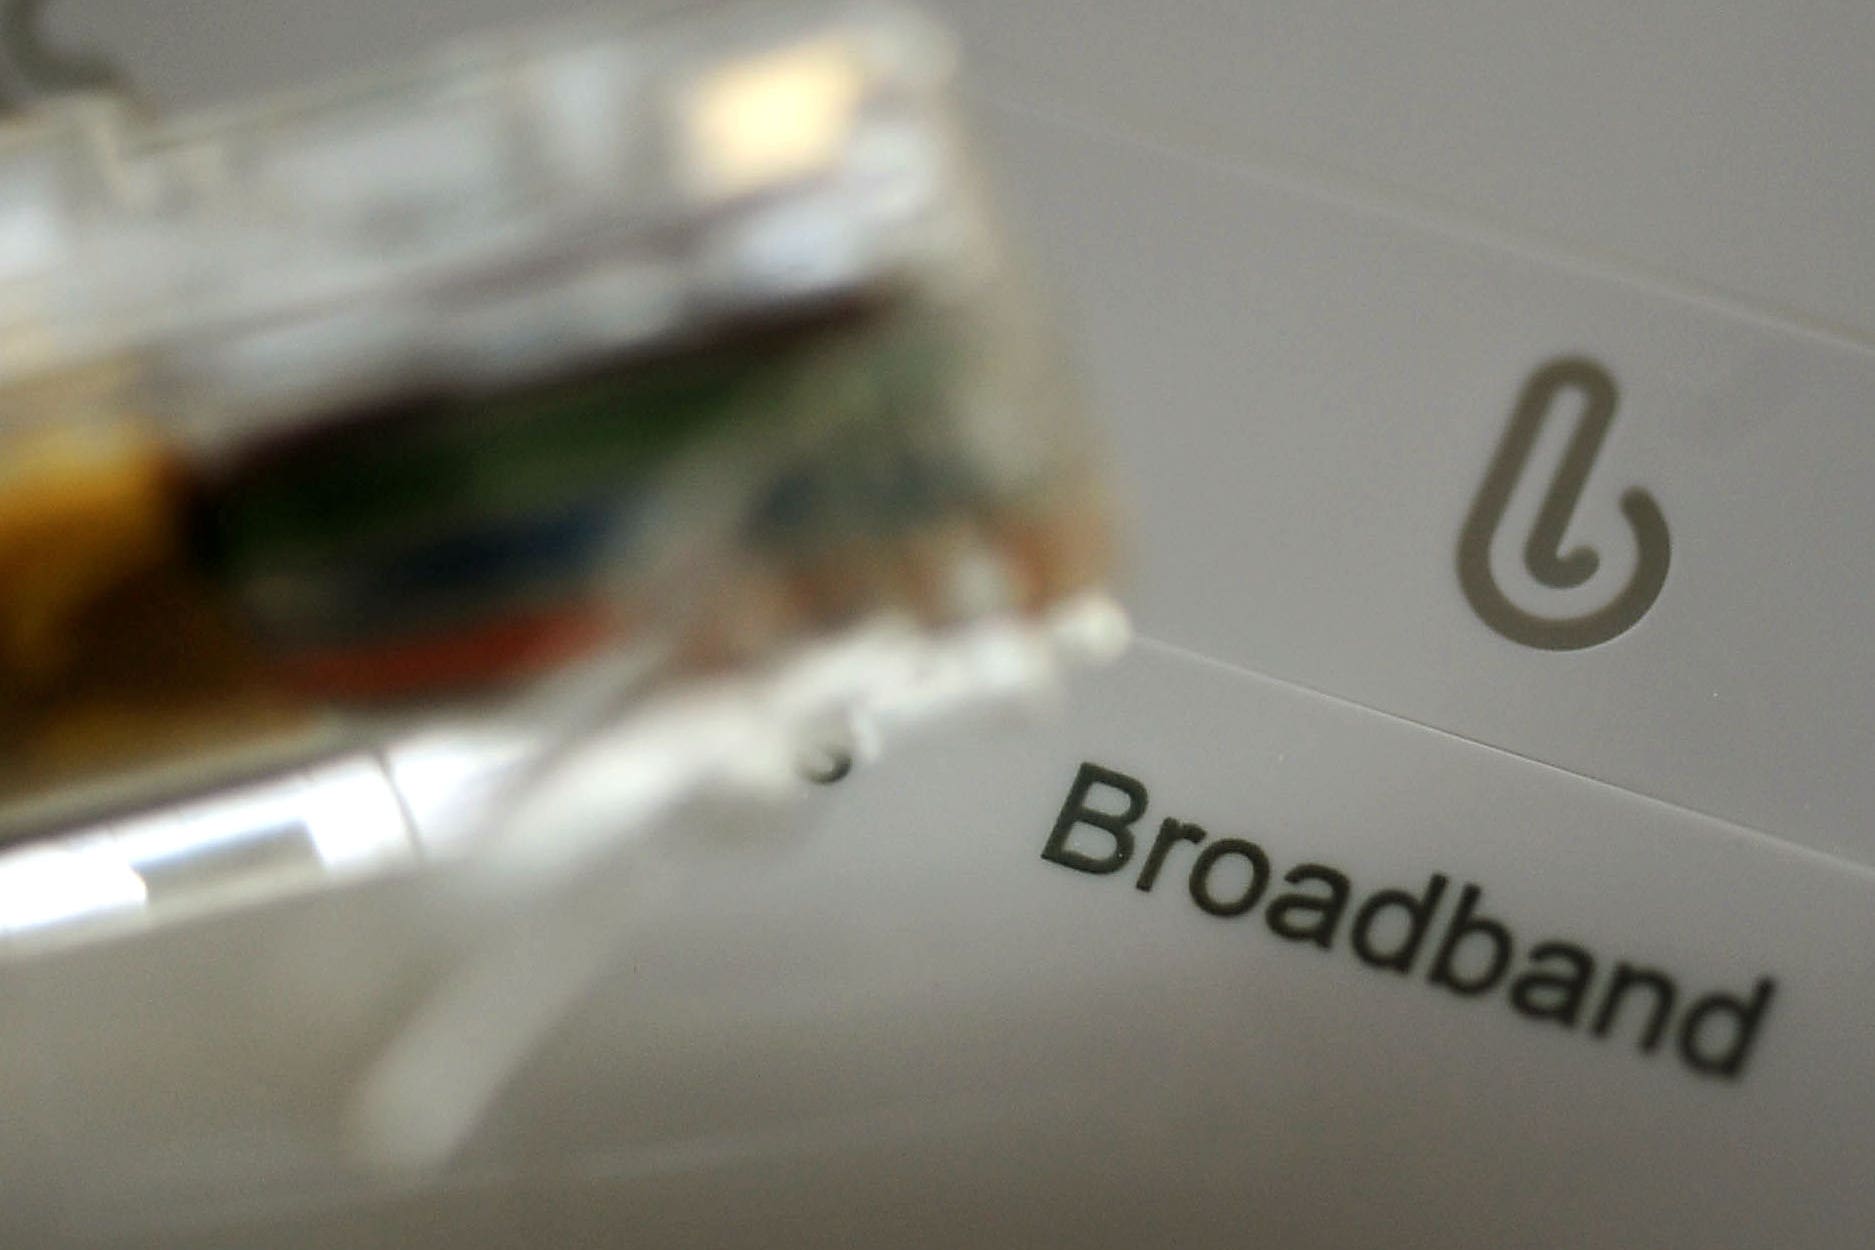 Broadband overtakes dial-up